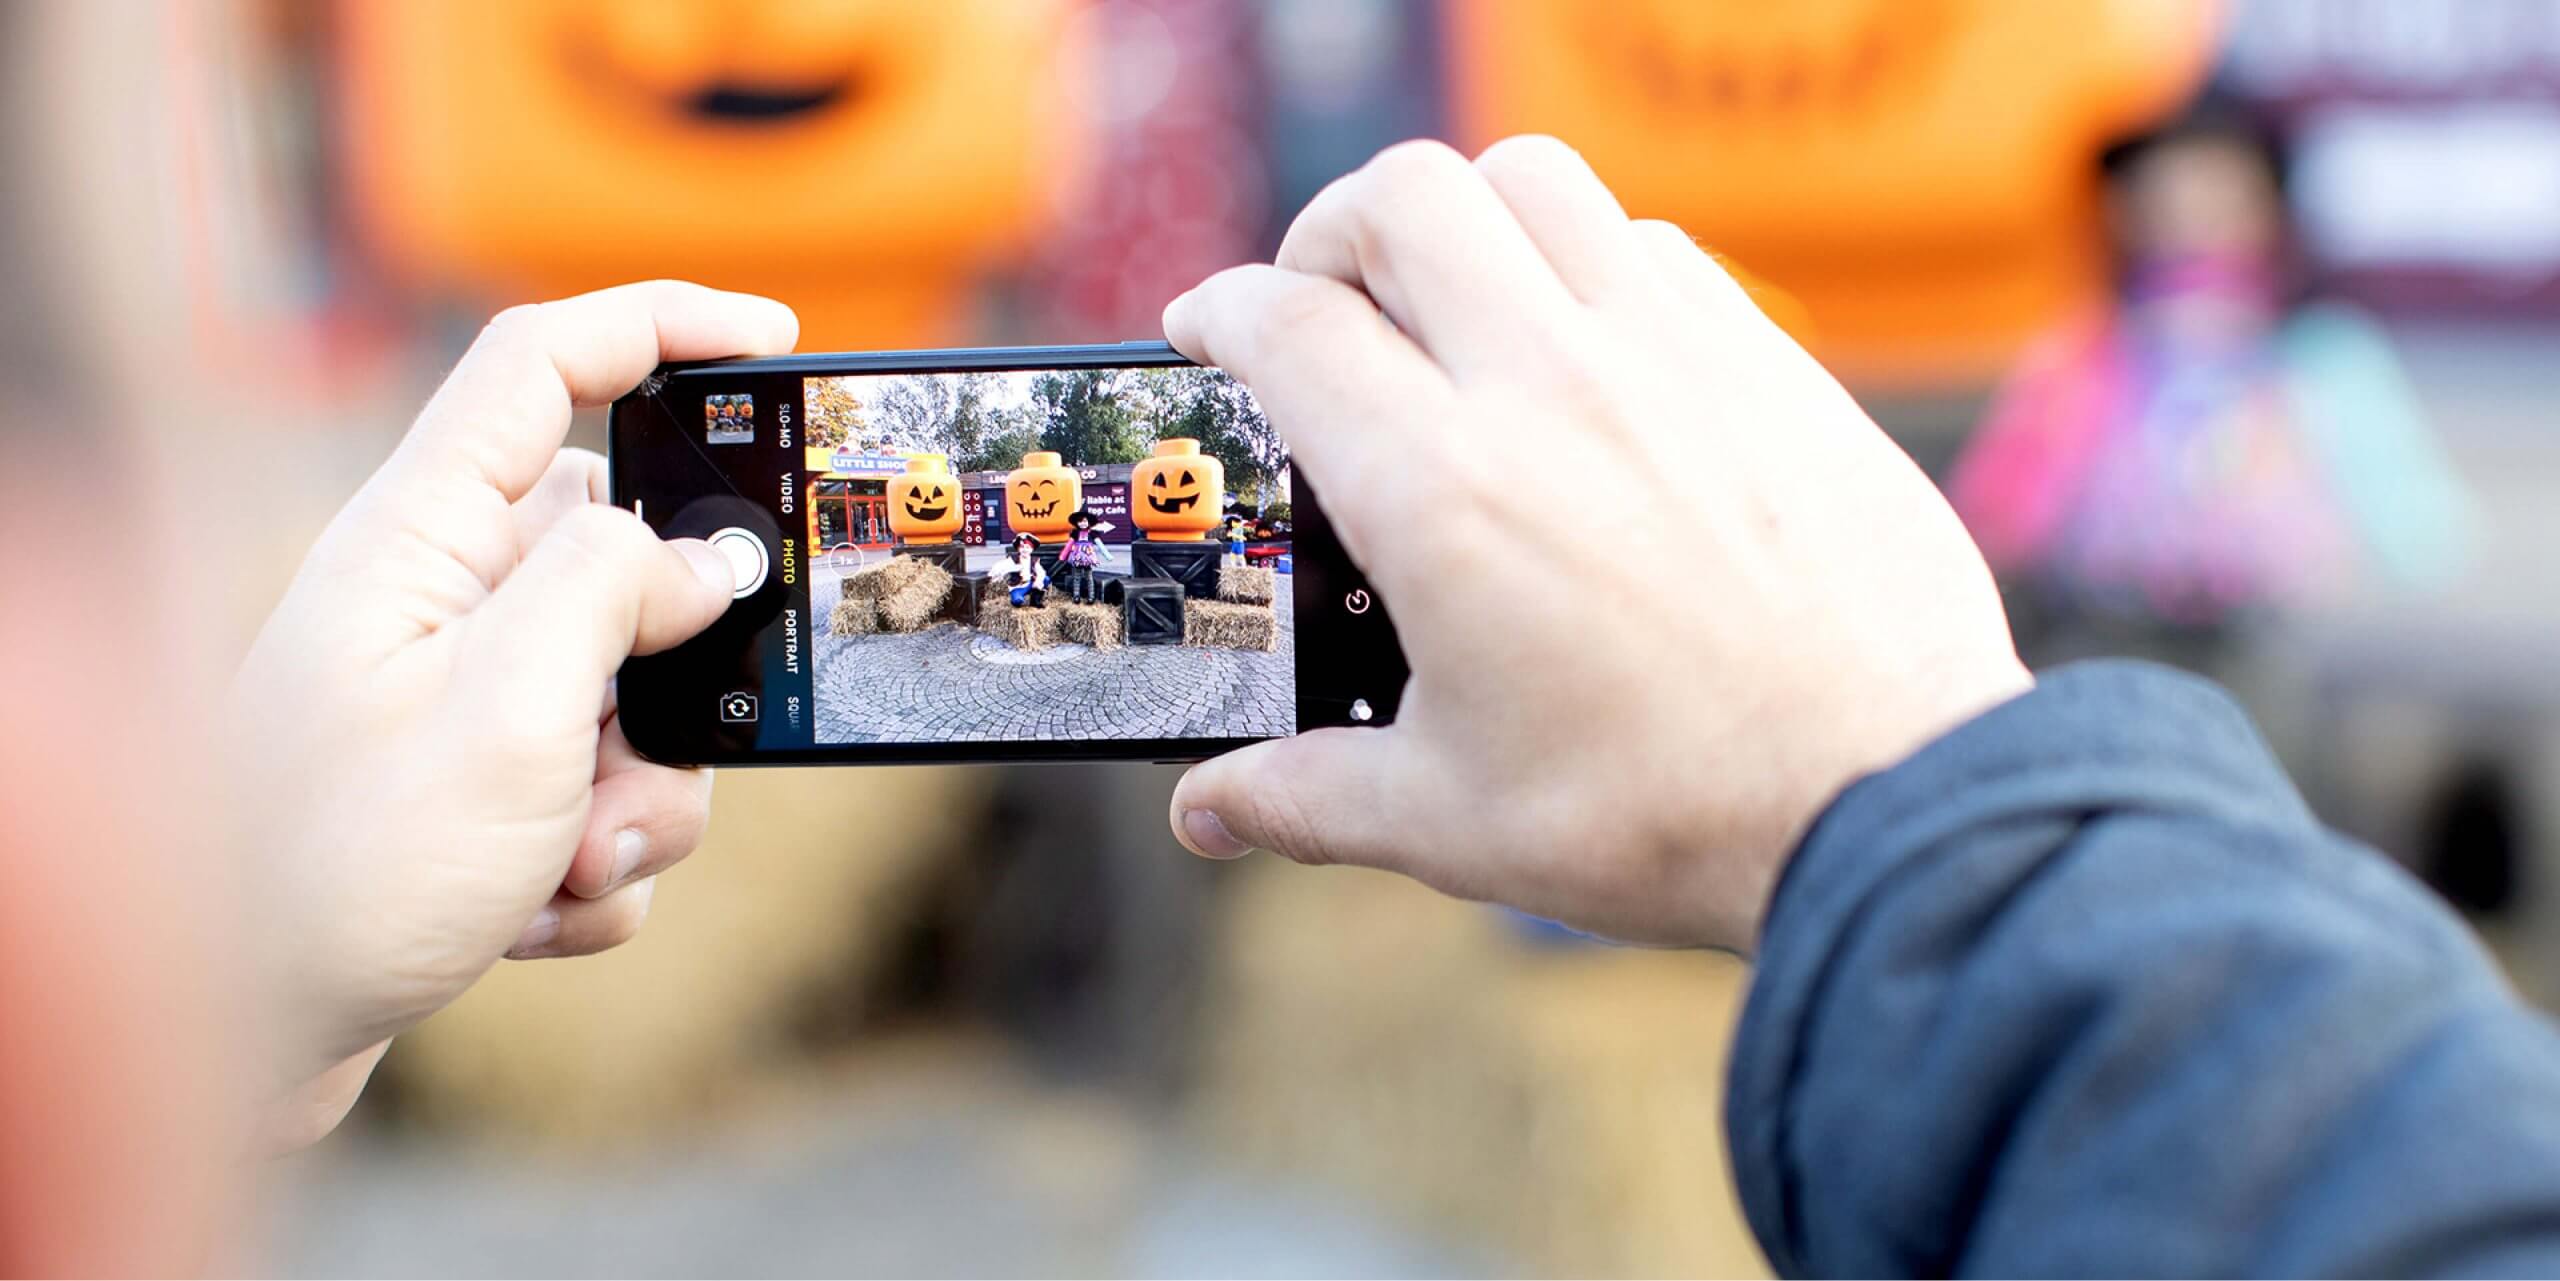 Man holding a phone taking a picture of Brick or Treat attraction